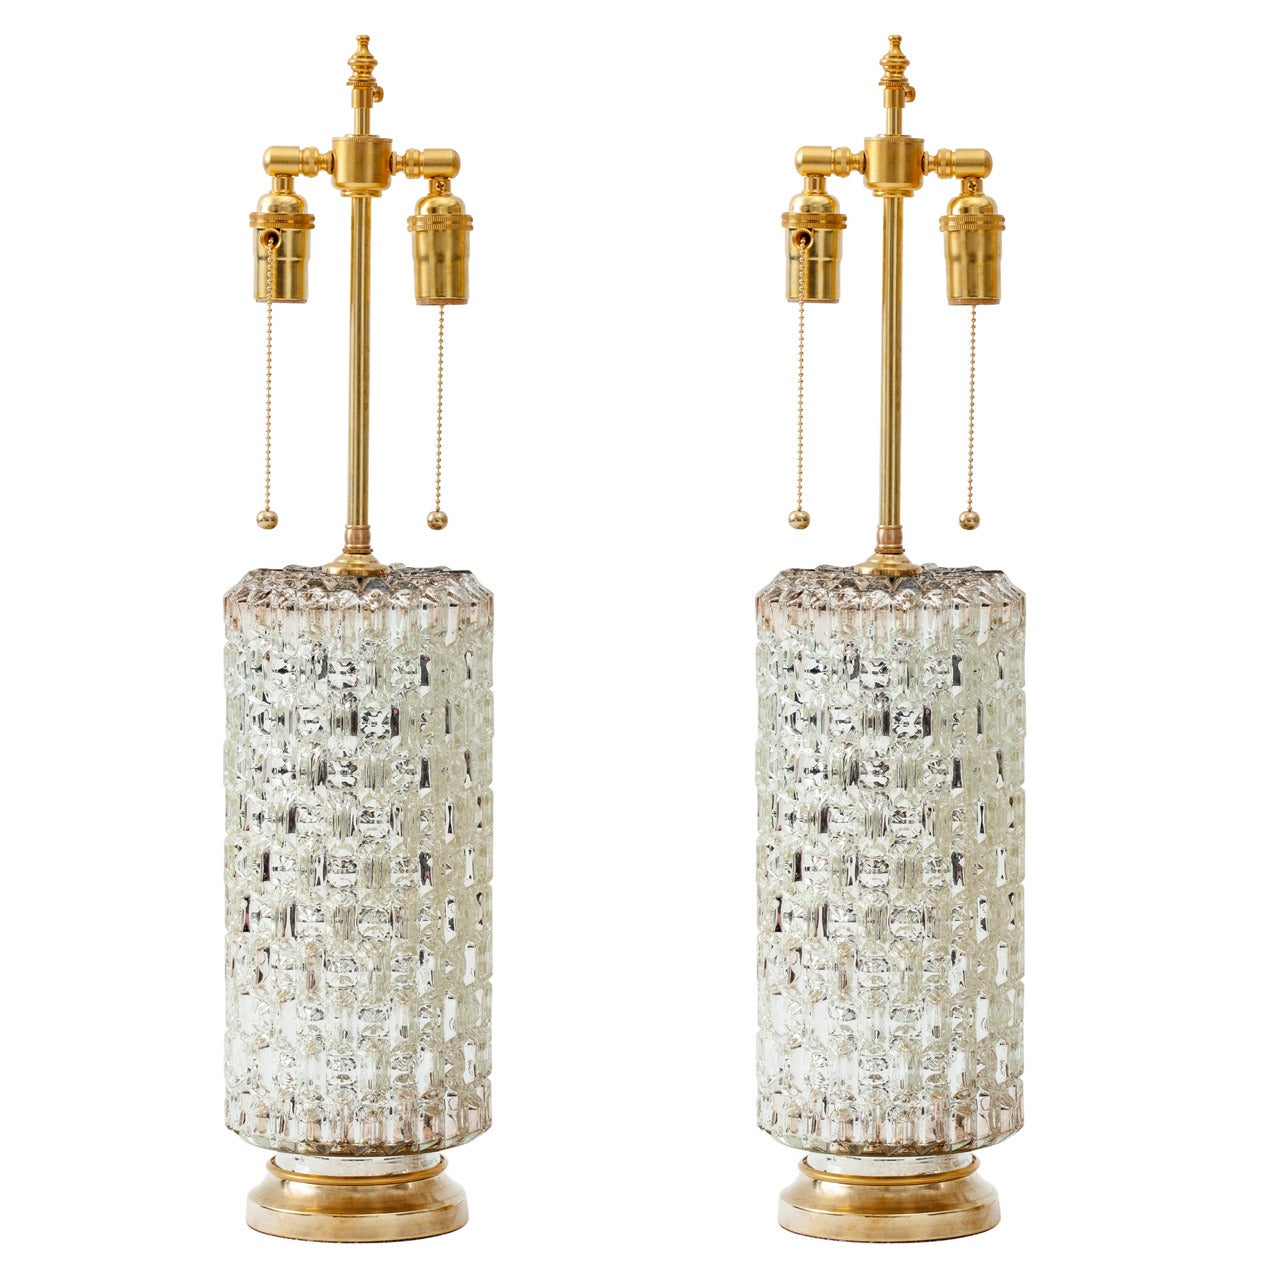 1970's Hollywood Regency Mercury Glass Cylinder Lamps